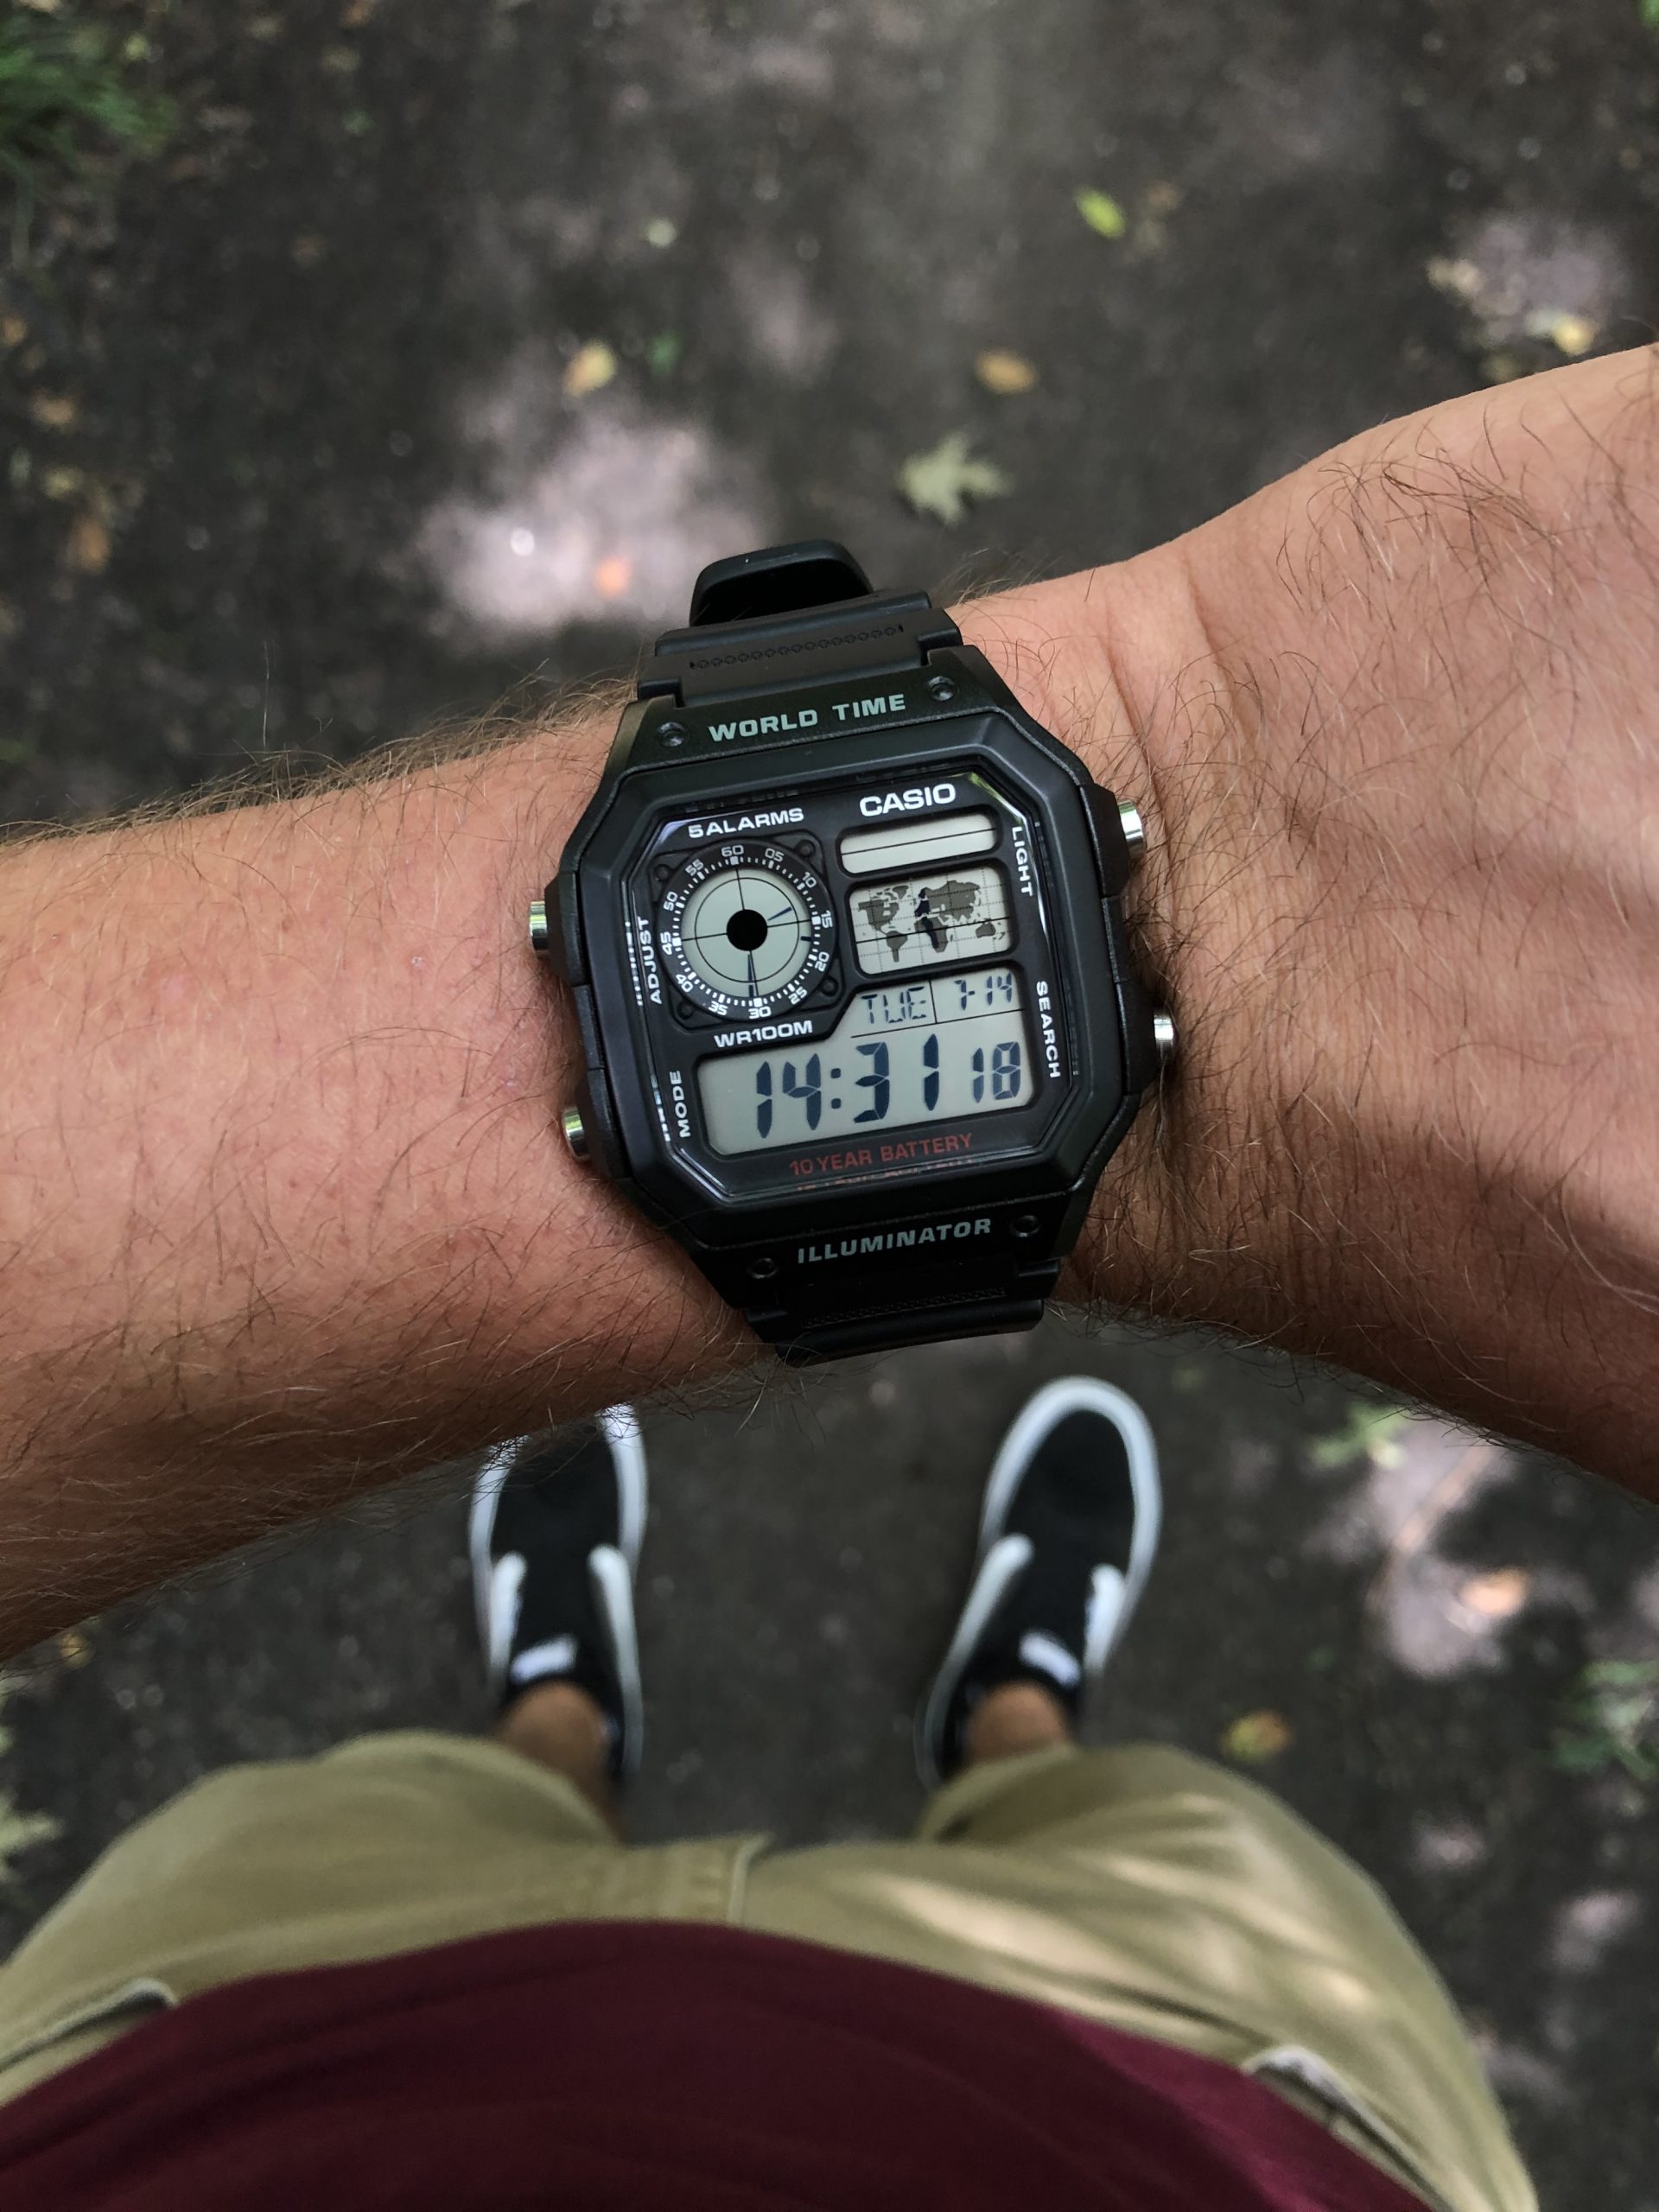 Casio AE1200 - which one to choose? - Watchmaniaq